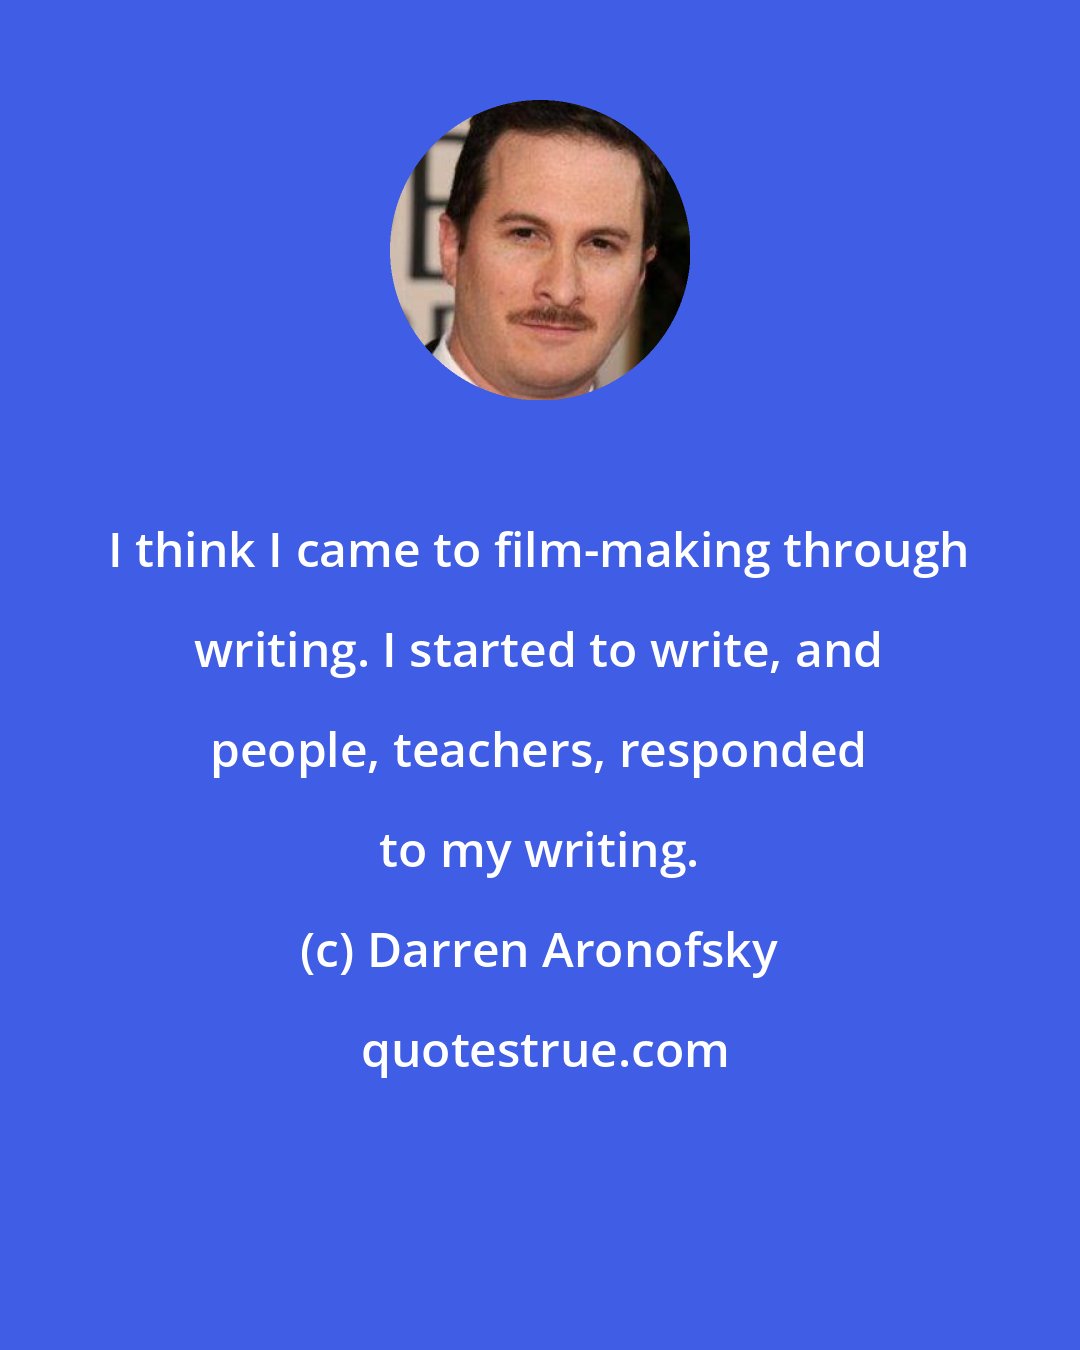 Darren Aronofsky: I think I came to film-making through writing. I started to write, and people, teachers, responded to my writing.